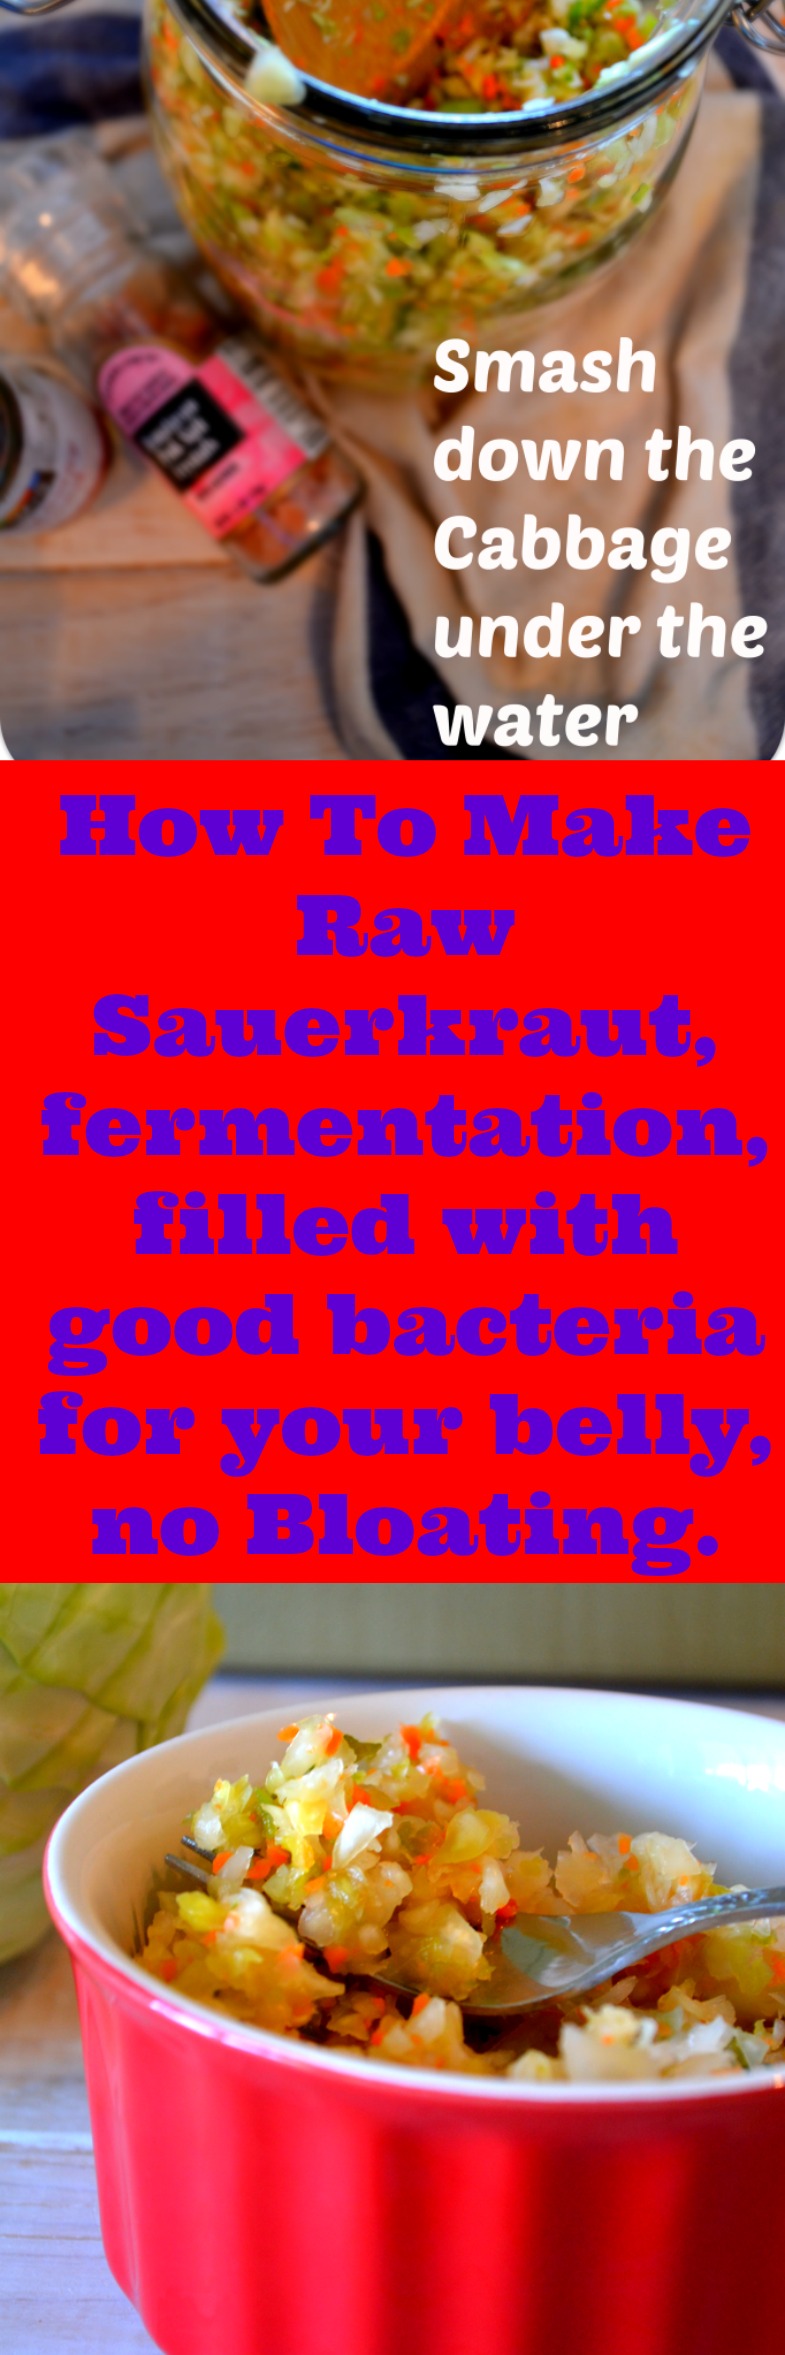 How To Make Raw Sauerkraut, fermentation, filled with good bacteria for your belly, Vitamin C and no Bloating. Fat Free and very Healthy for your belly and weight loss.